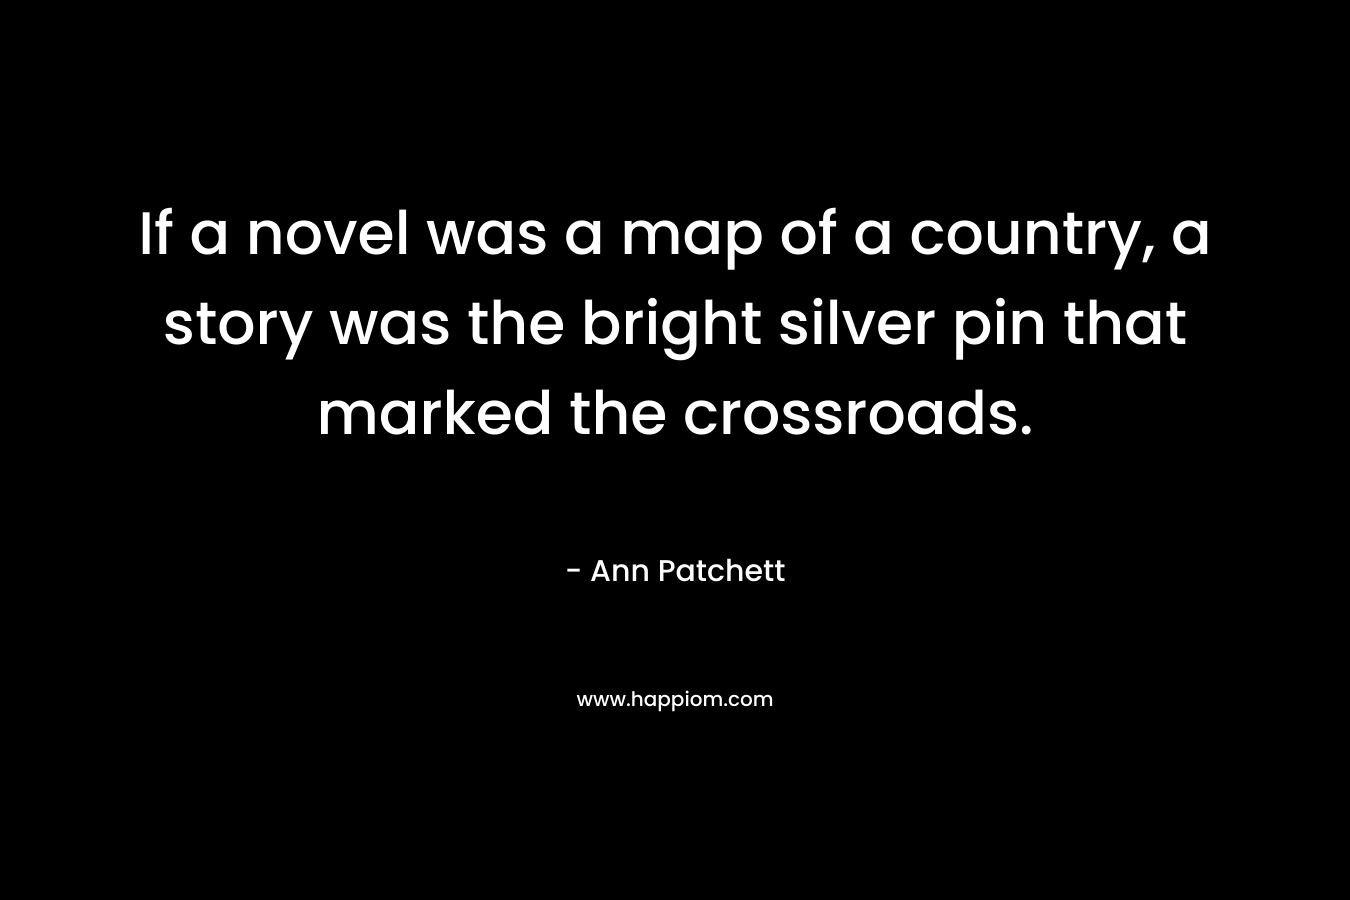 If a novel was a map of a country, a story was the bright silver pin that marked the crossroads. – Ann Patchett